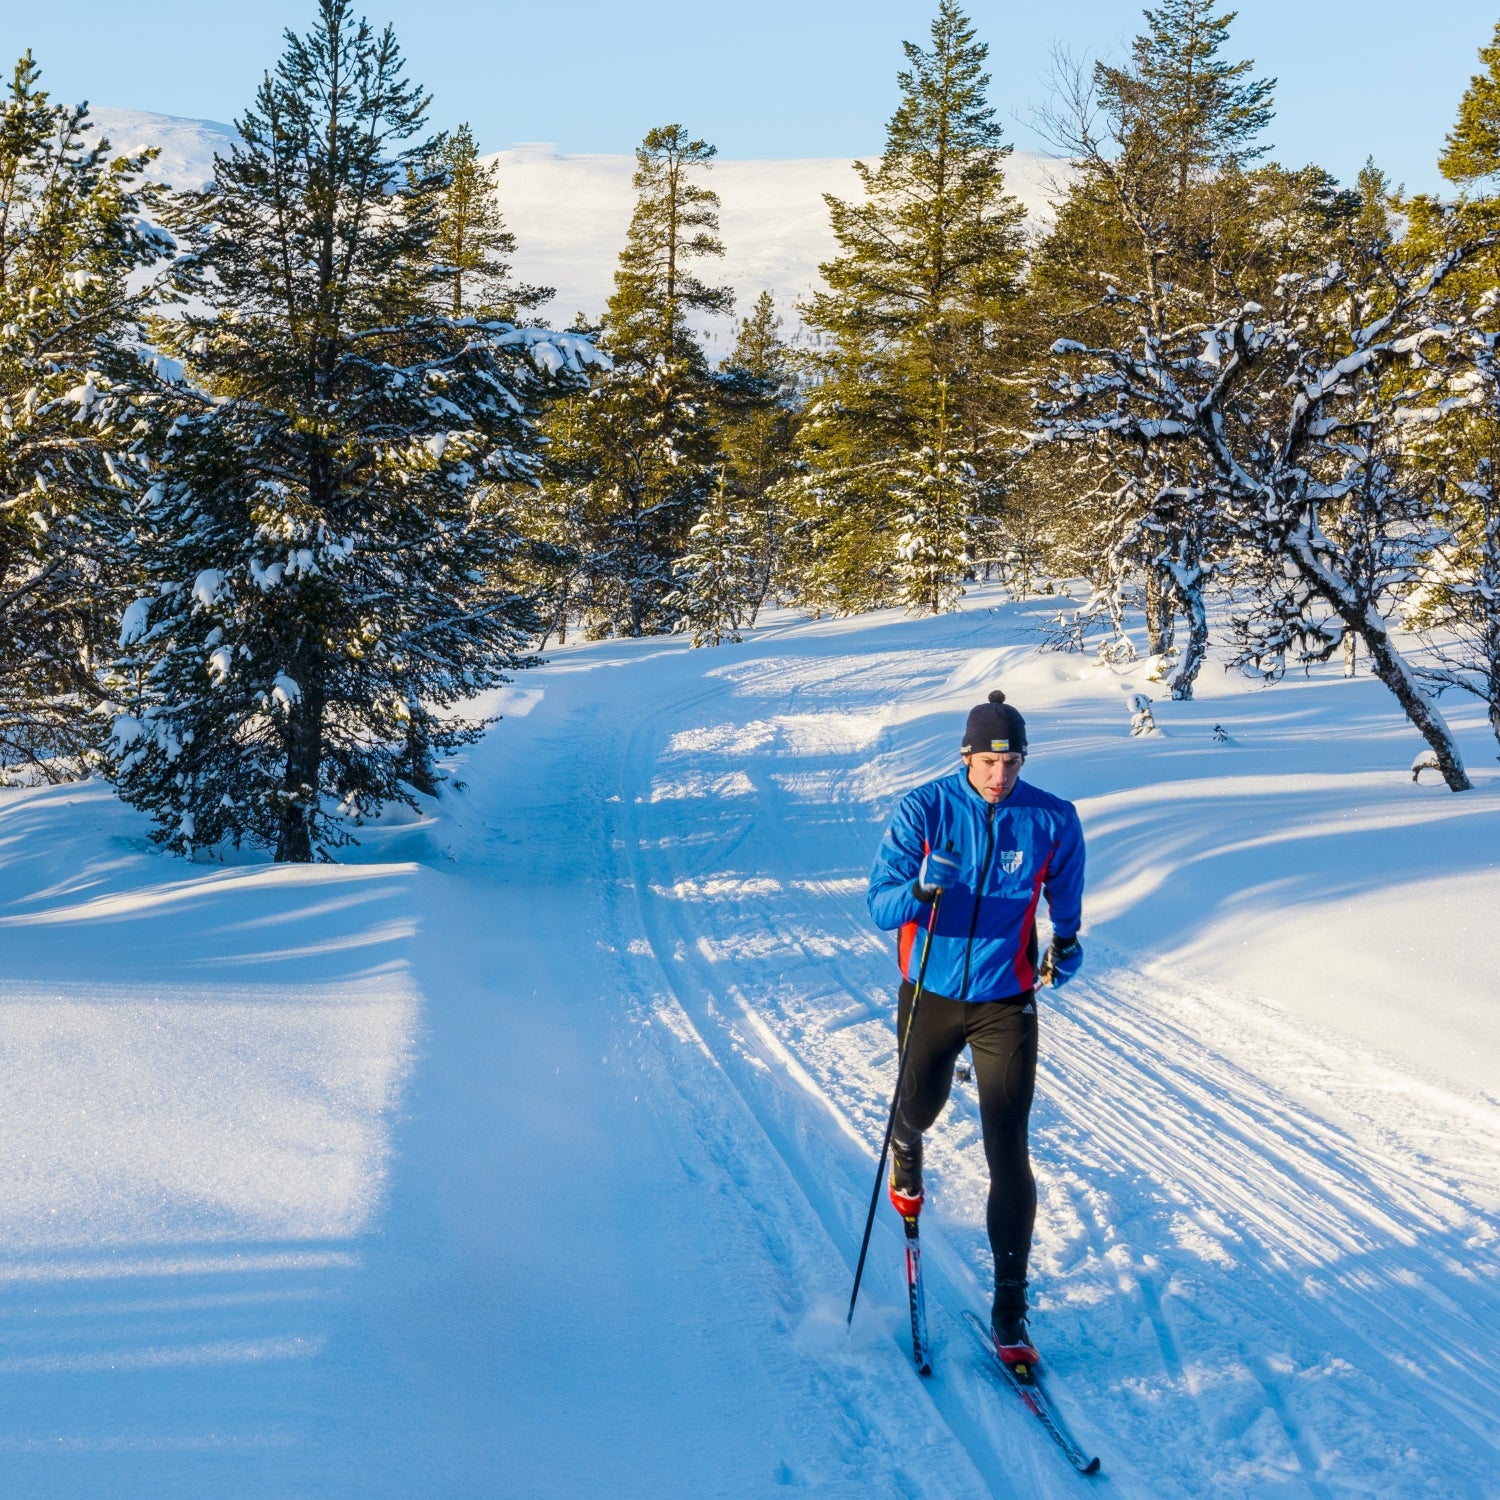 Cross Country Skiing Equipment For Sale In VT Online